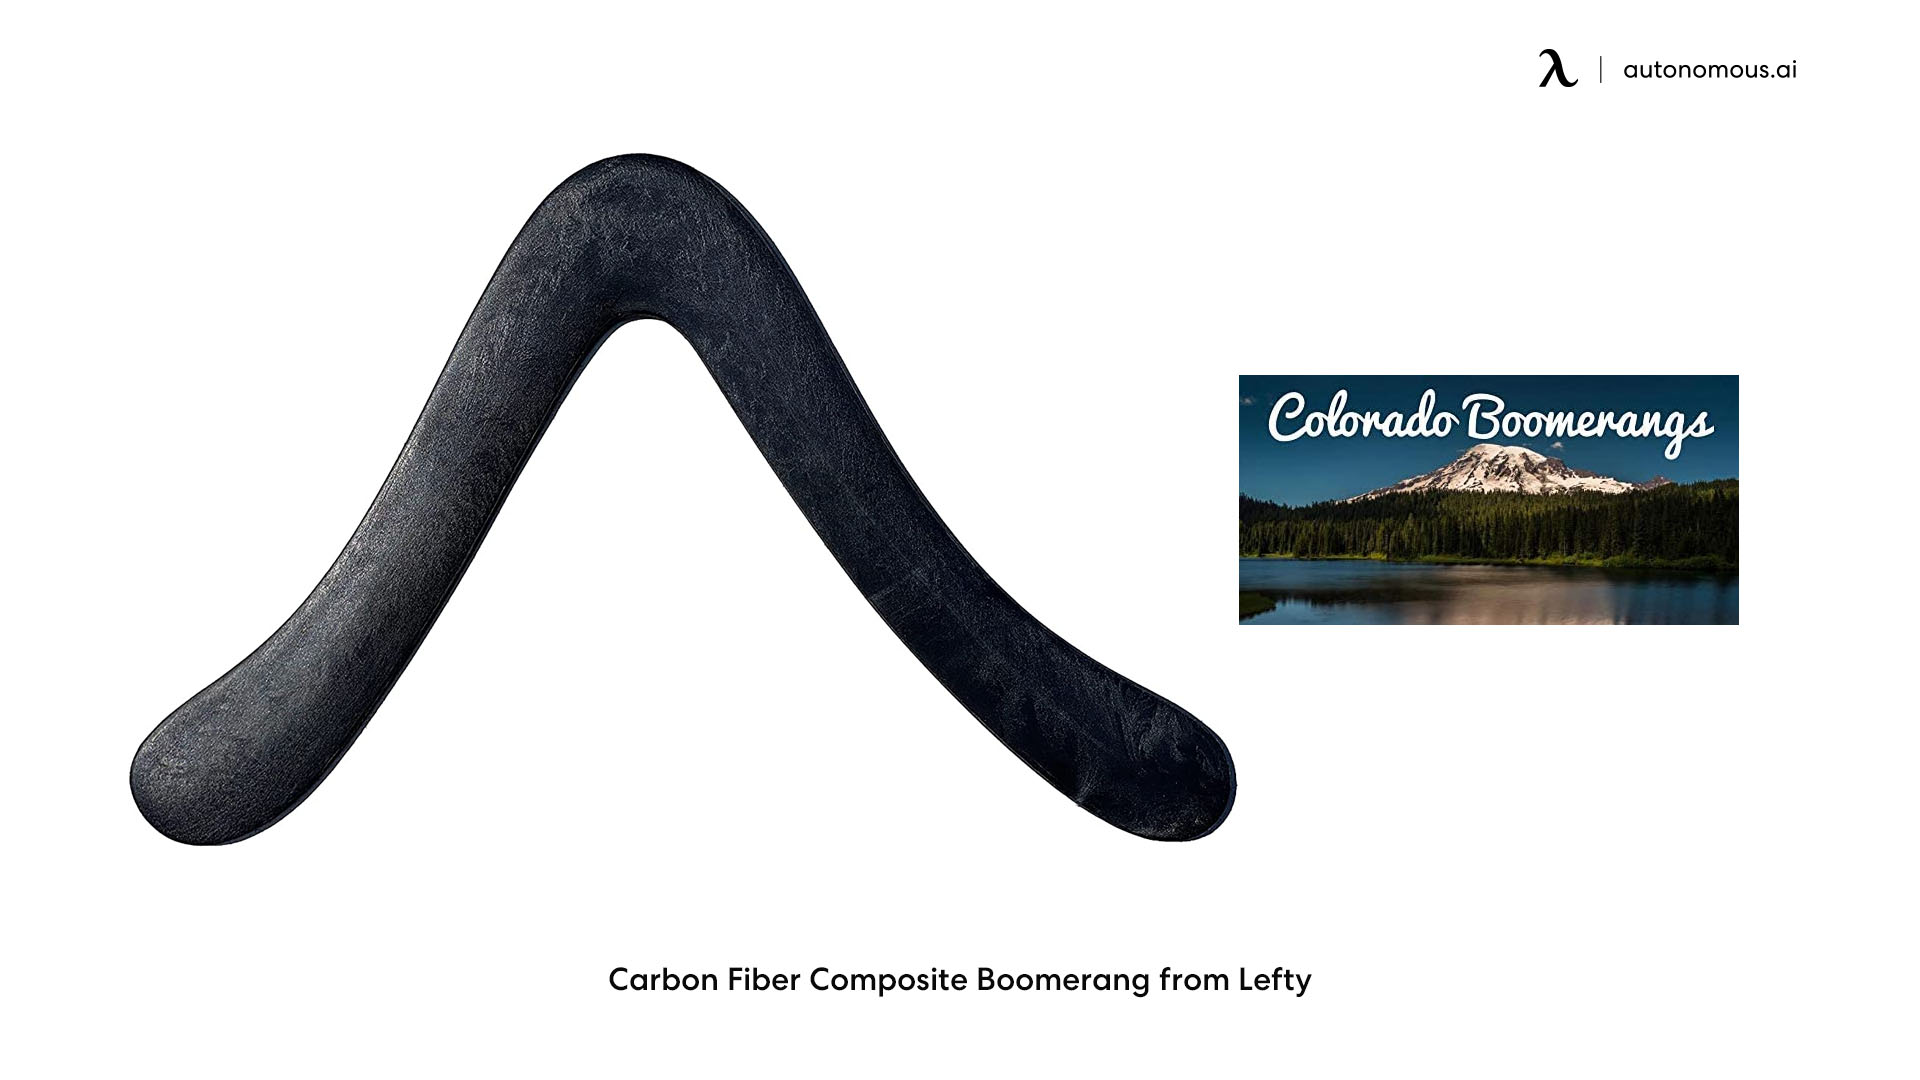 Carbon Fiber Composite Boomerang from Lefty